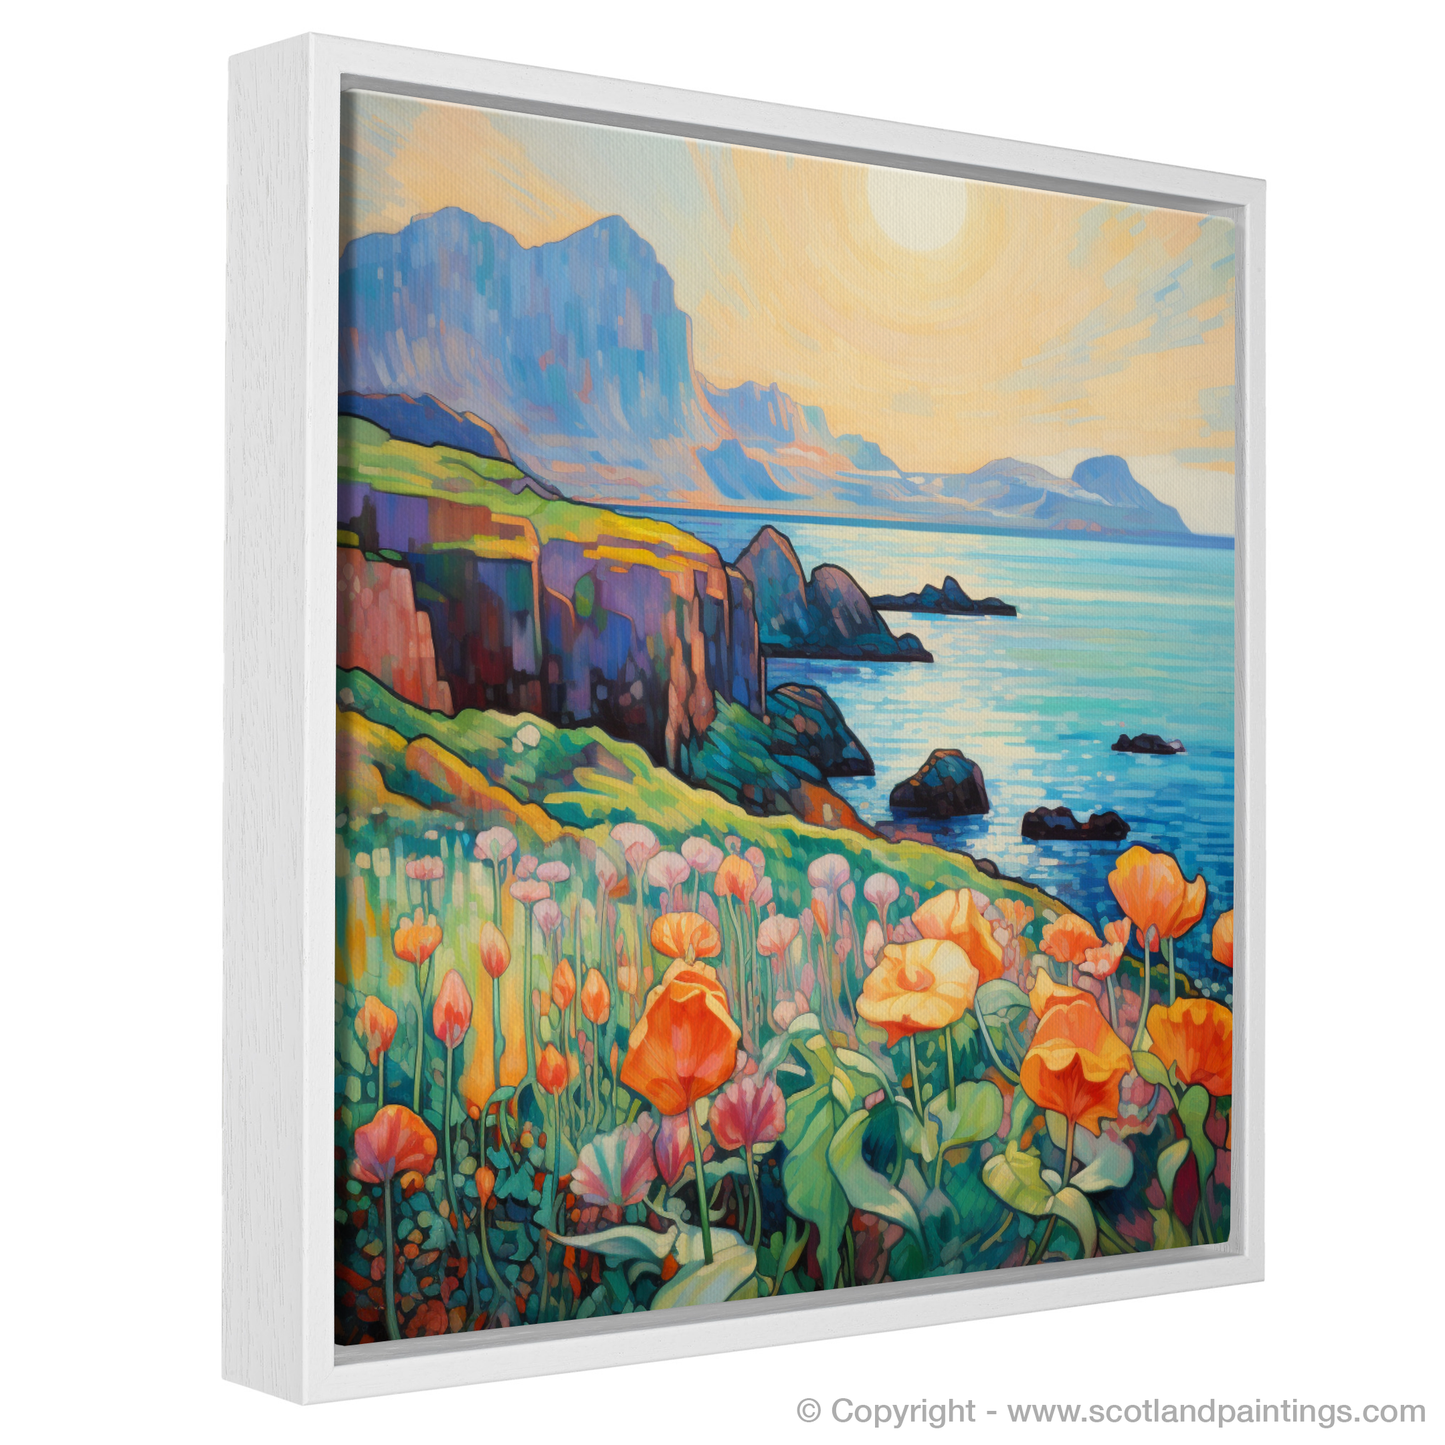 Painting and Art Print of Isle of Canna, Inner Hebrides in summer entitled "Summer Serenade on the Isle of Canna".